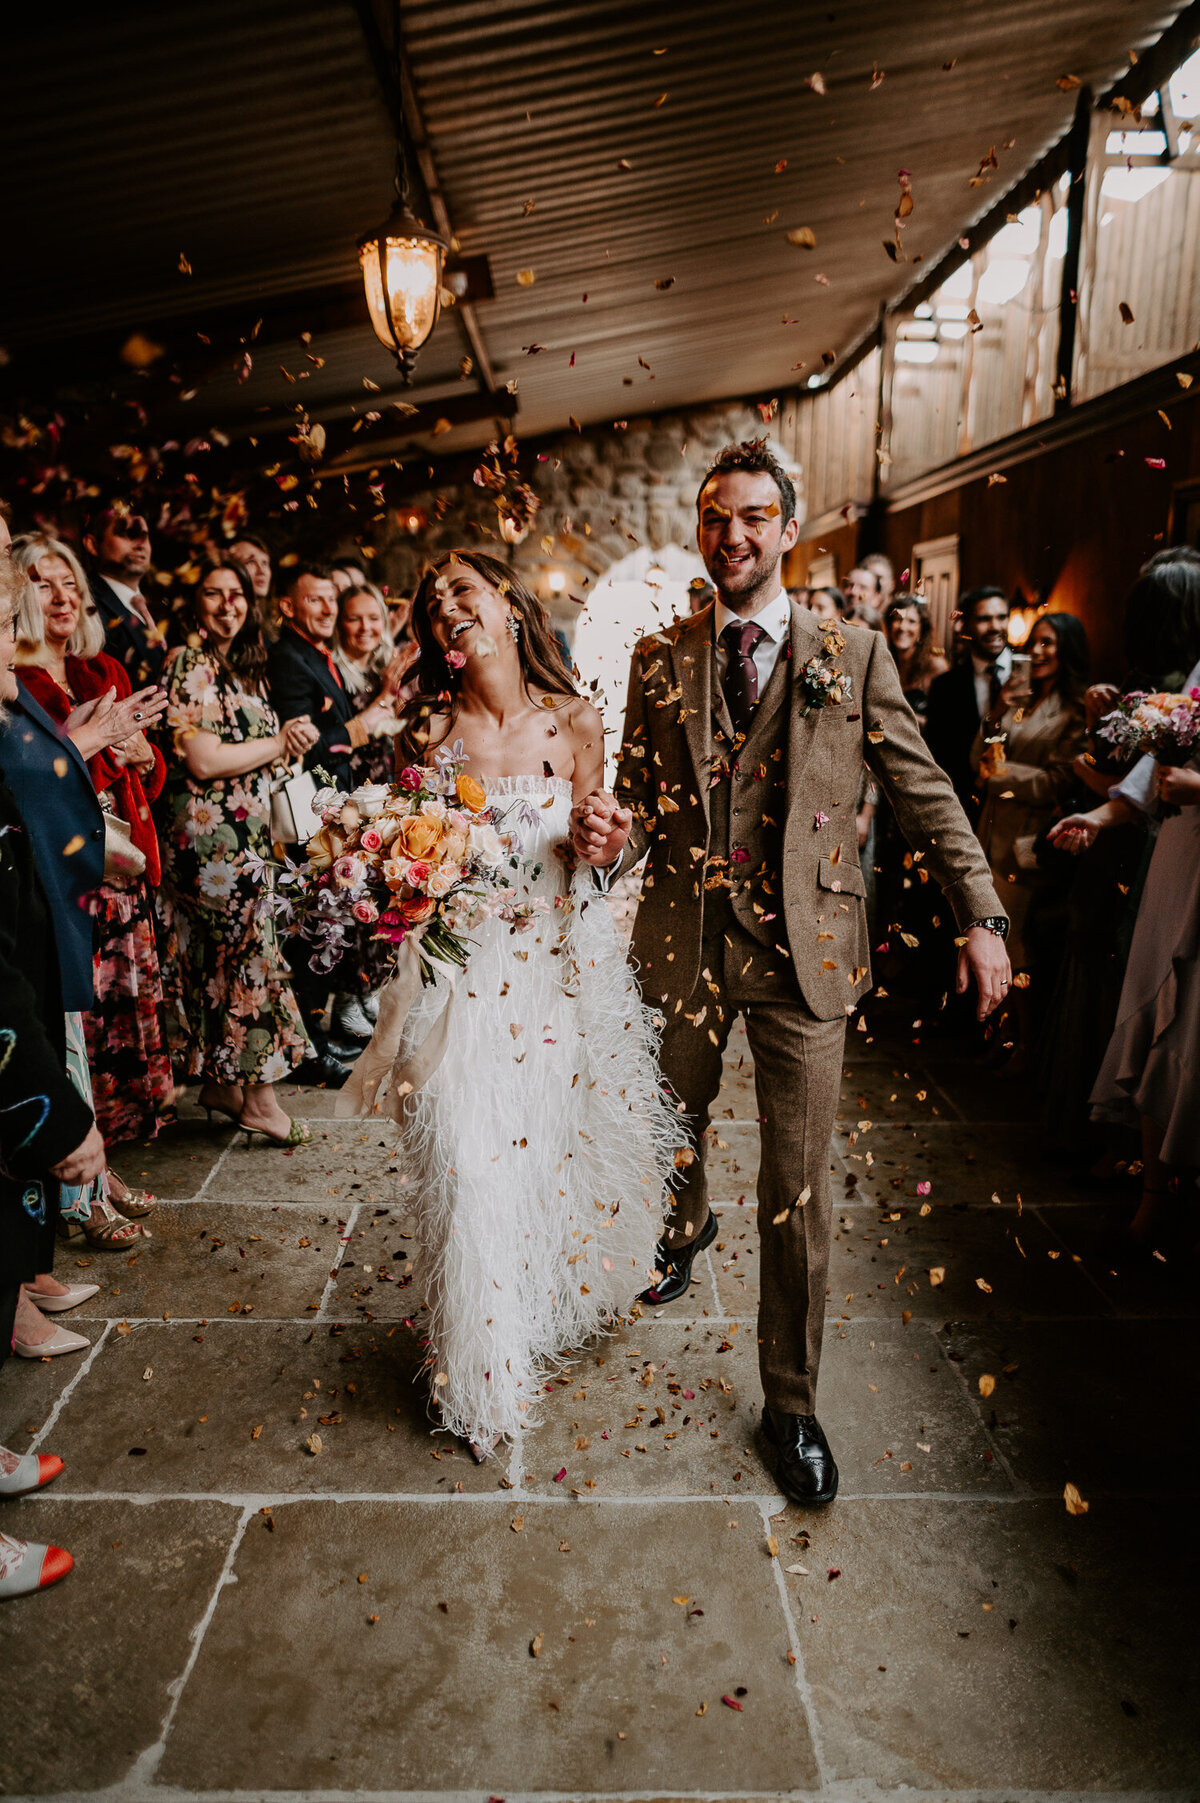 Confetti flys down on a bride and groom at The Willow Marsh Farm. The bride is also holding an orange bouquet and is wearing a fringed wedding dress.